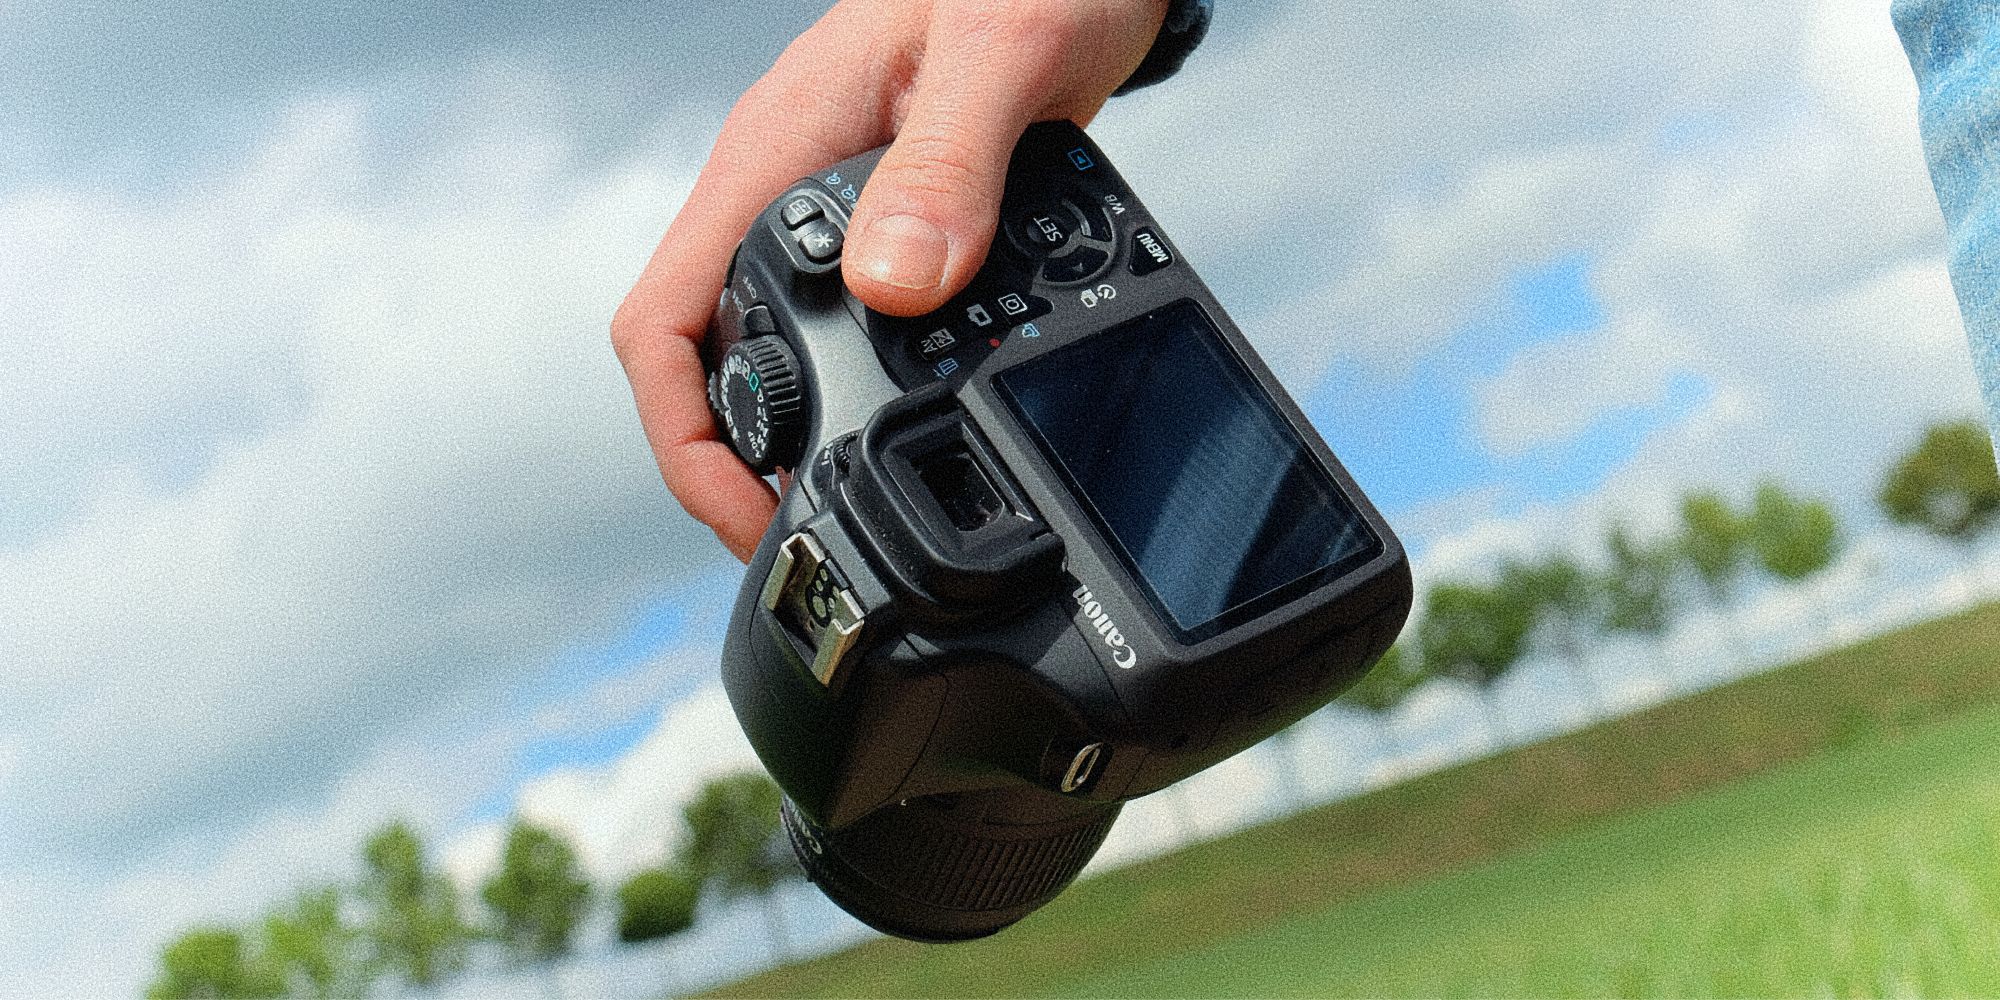 CLOSE UP OF A PERSON HOLDING A DSLR